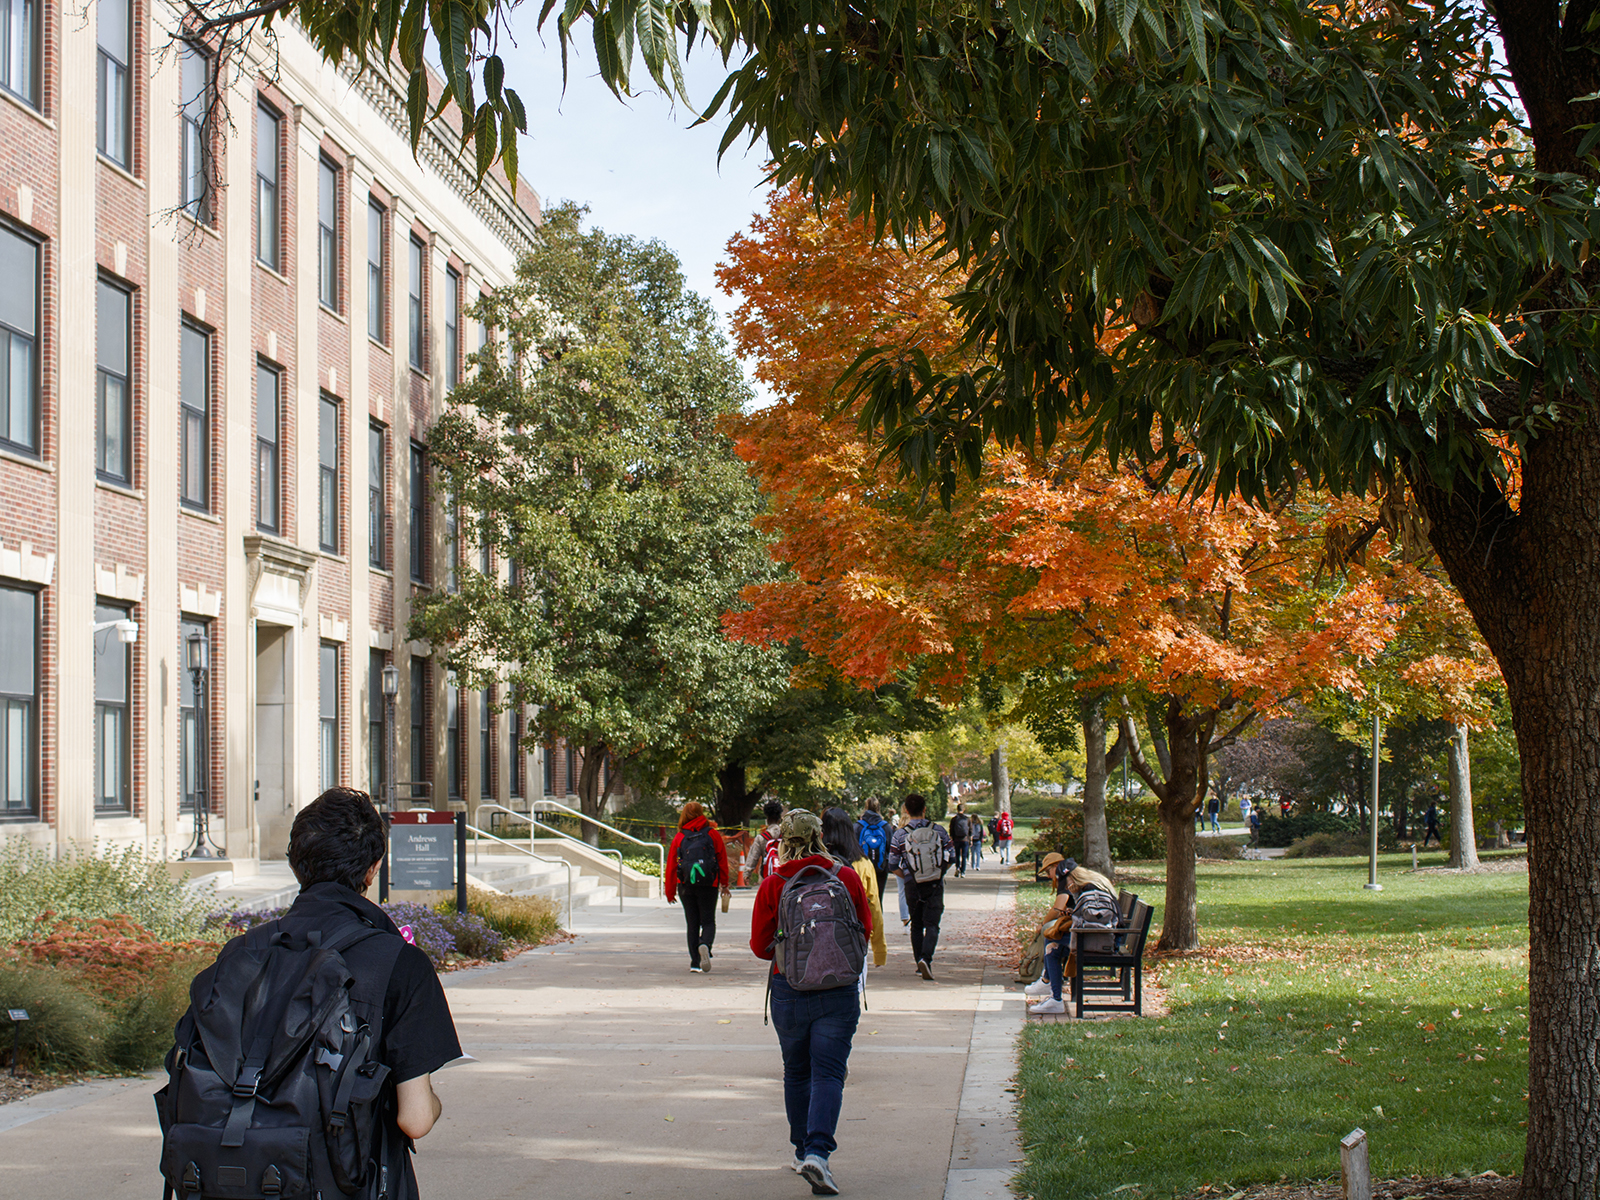 On days when weather is still nice, find time to enjoy nature by taking a walk during a study break or finding a good outdoor study location.